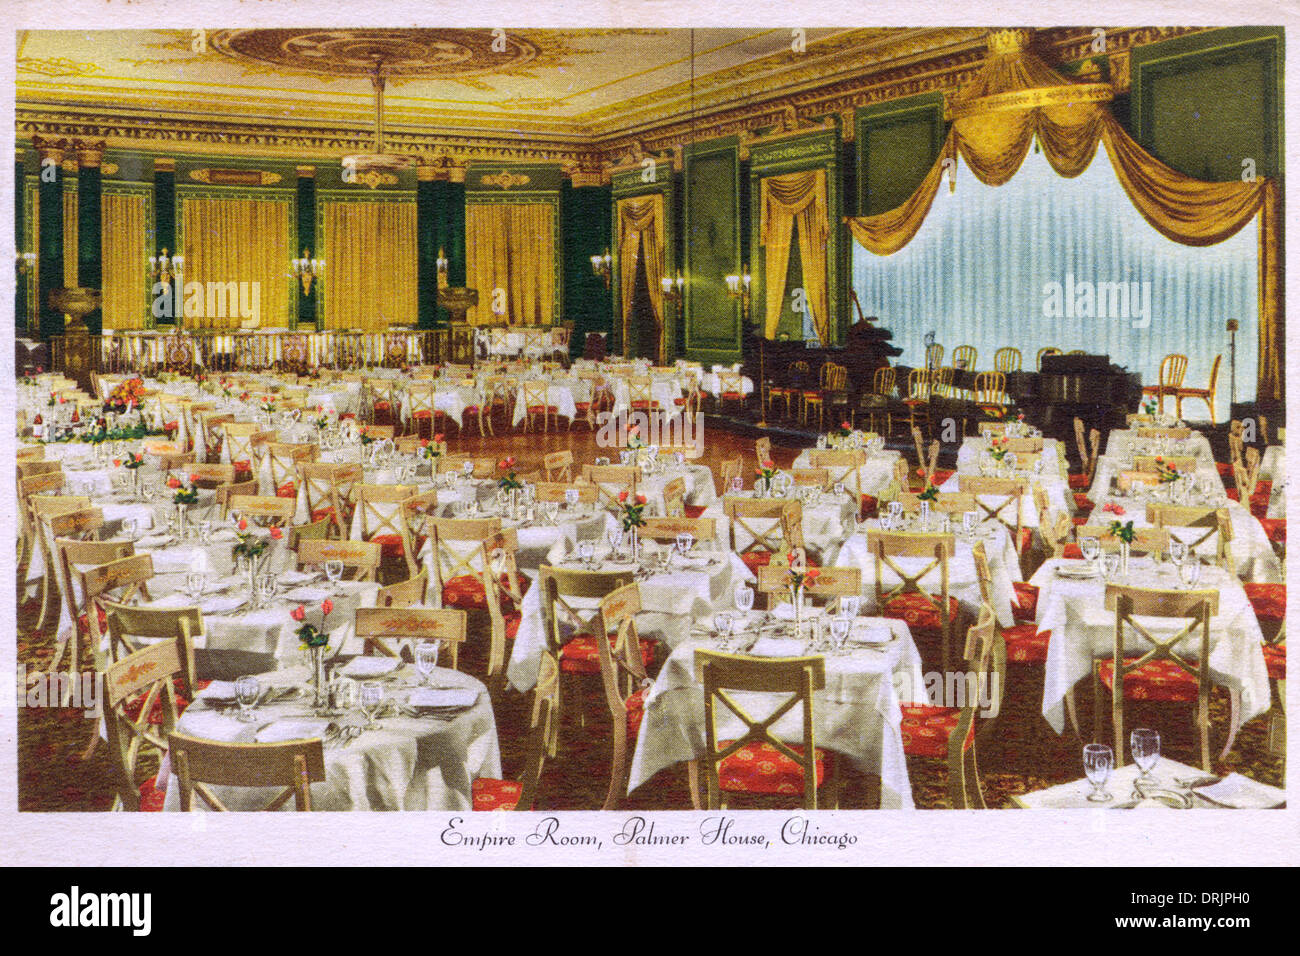 The Empire Room at the Palmer House Hotel in Chicago Stock Photo